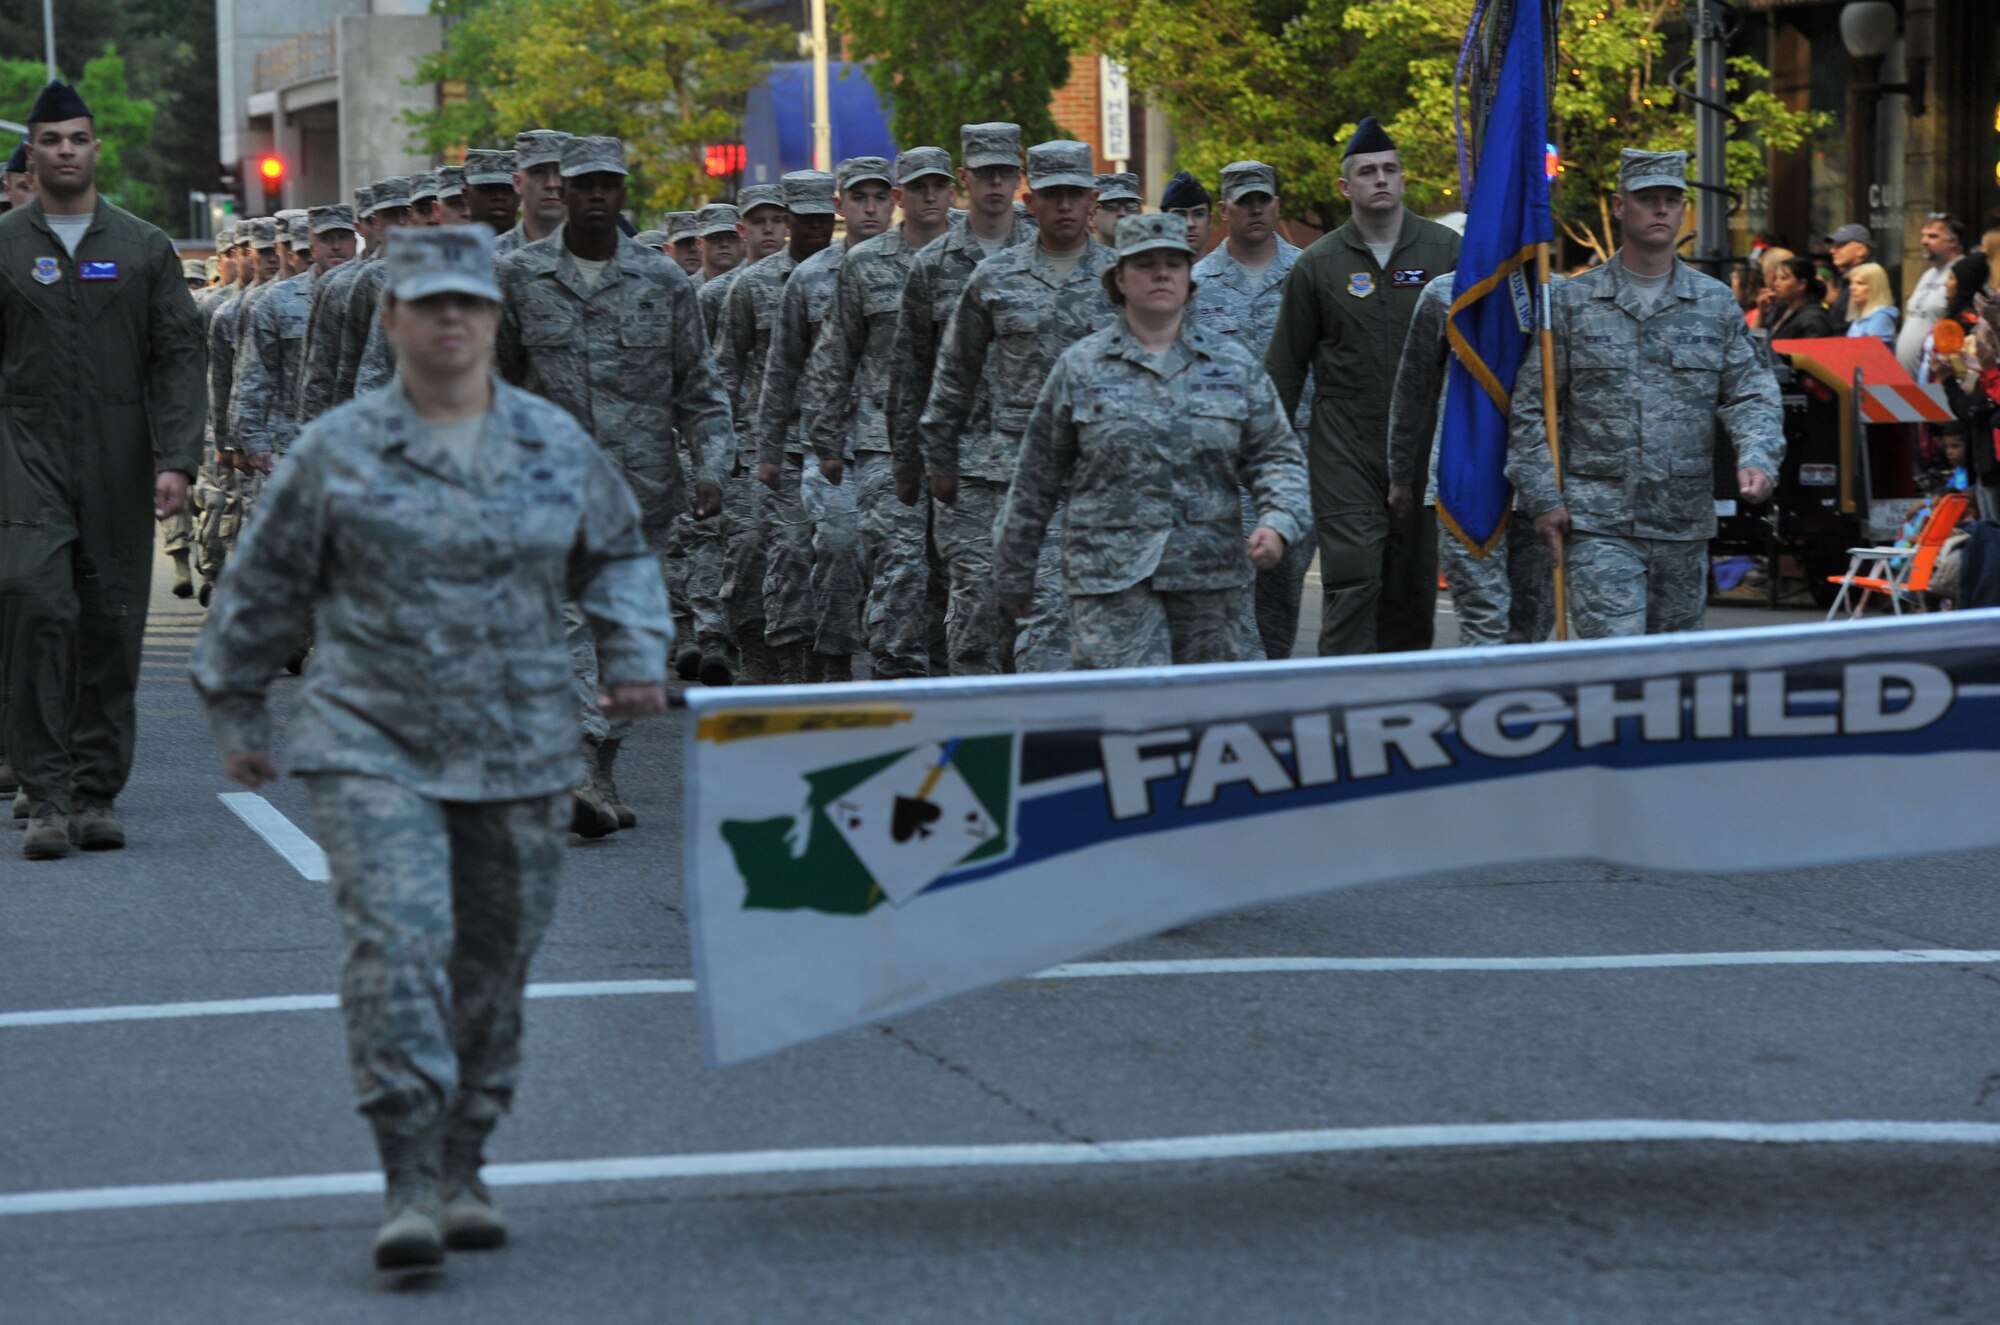 Members from Team Fairchild represent the base the during Lilac Festival 2014 Armed Forced Torchlight Parade in Spokane Wash., May 17, 2014. This parade is the largest armed forces torchlight parade in the nation.  (U.S. Air Force photo by Staff Sgt. Veronica Montes/Released)